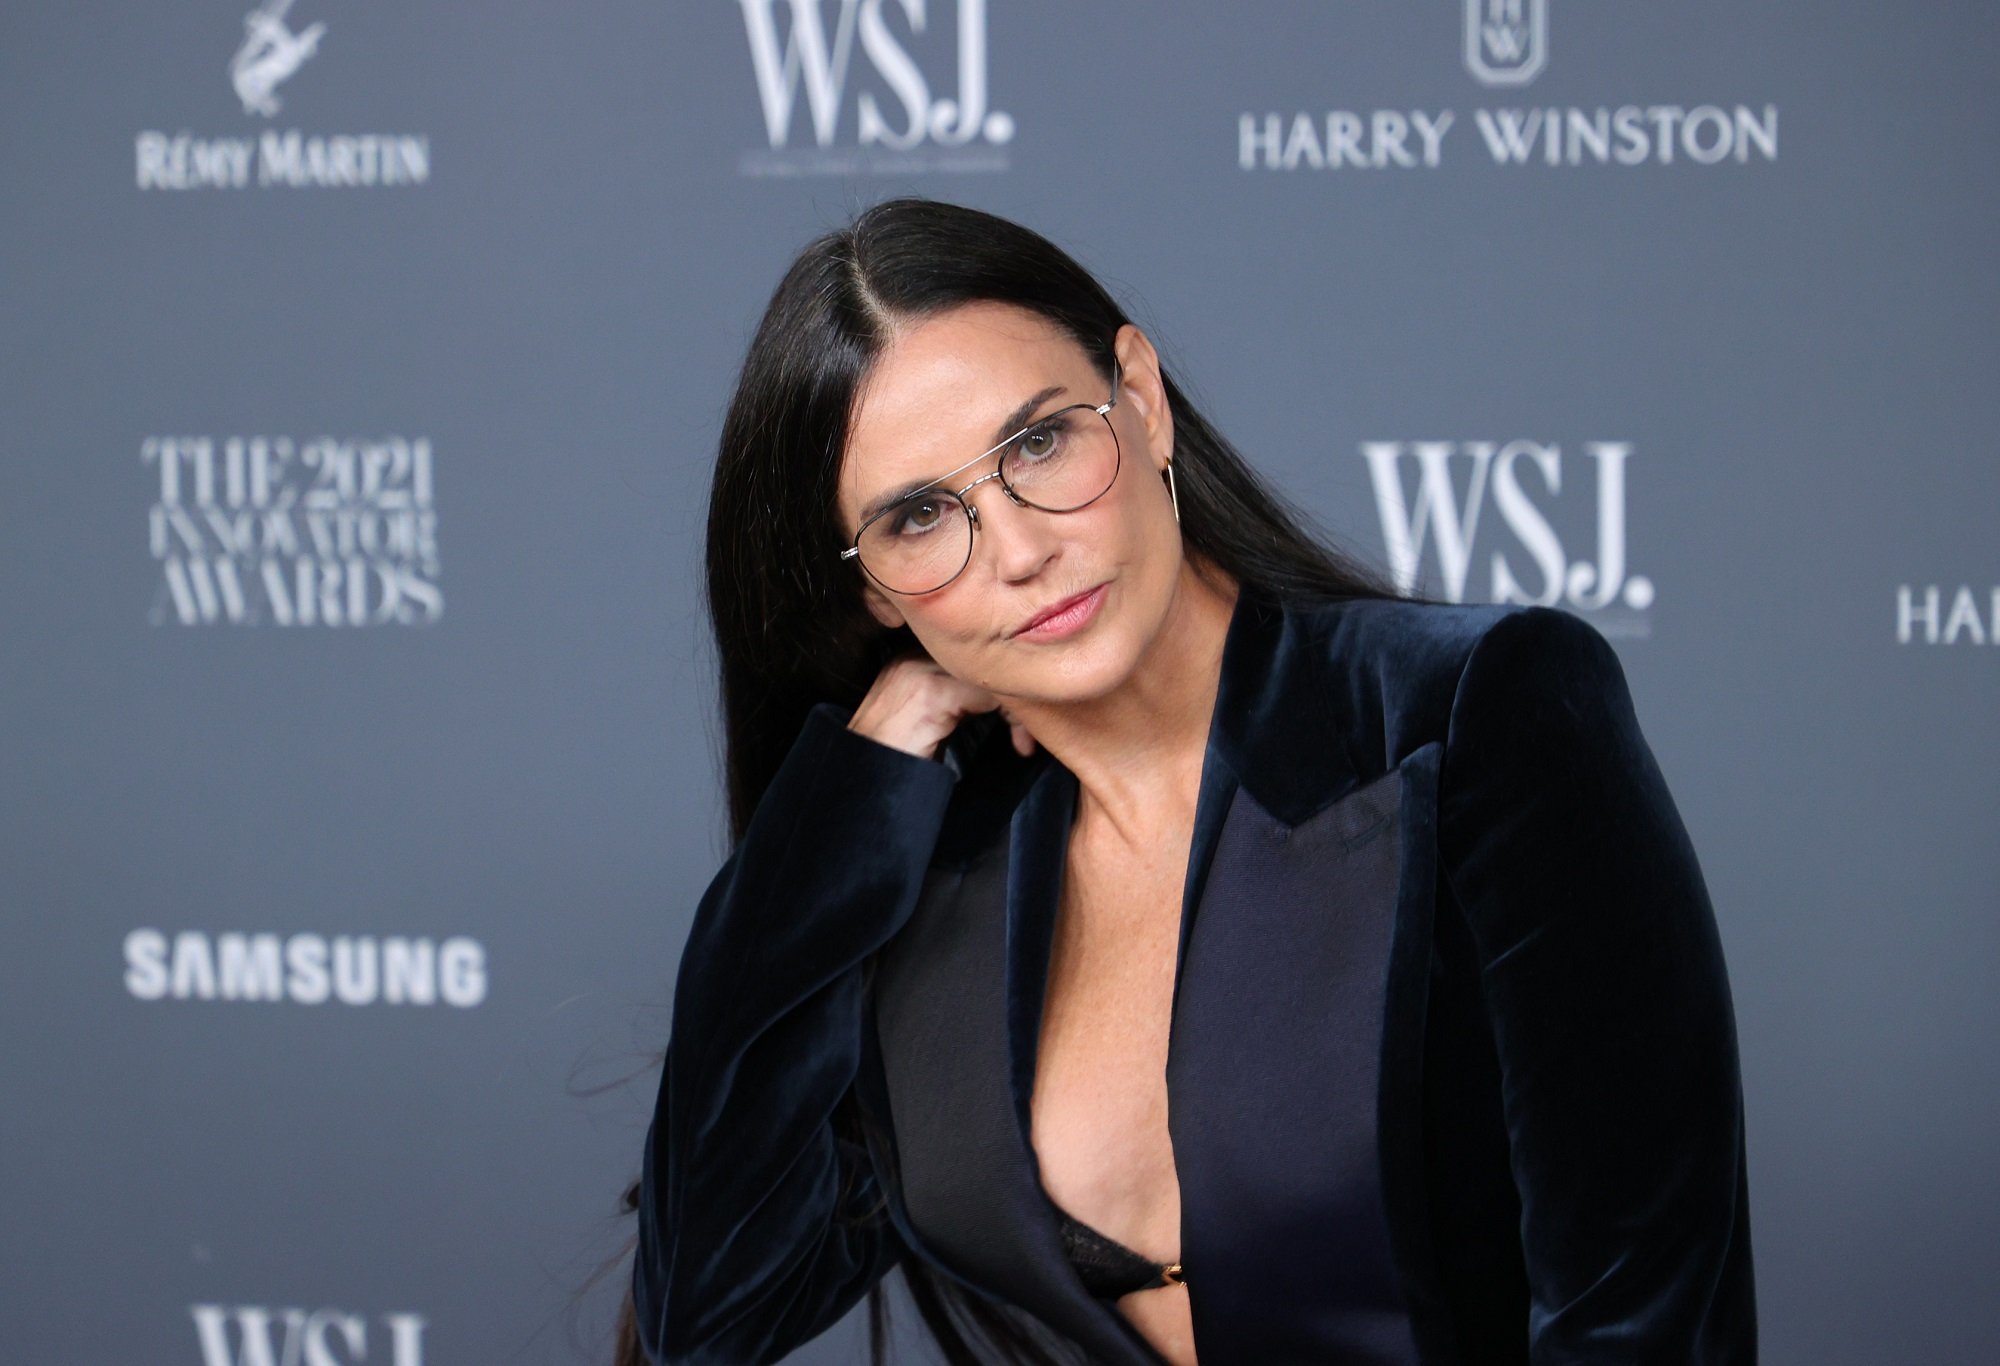 General Hospital star Demi Moore, whose co-star was John Stamos, in a blue jacket and glasses